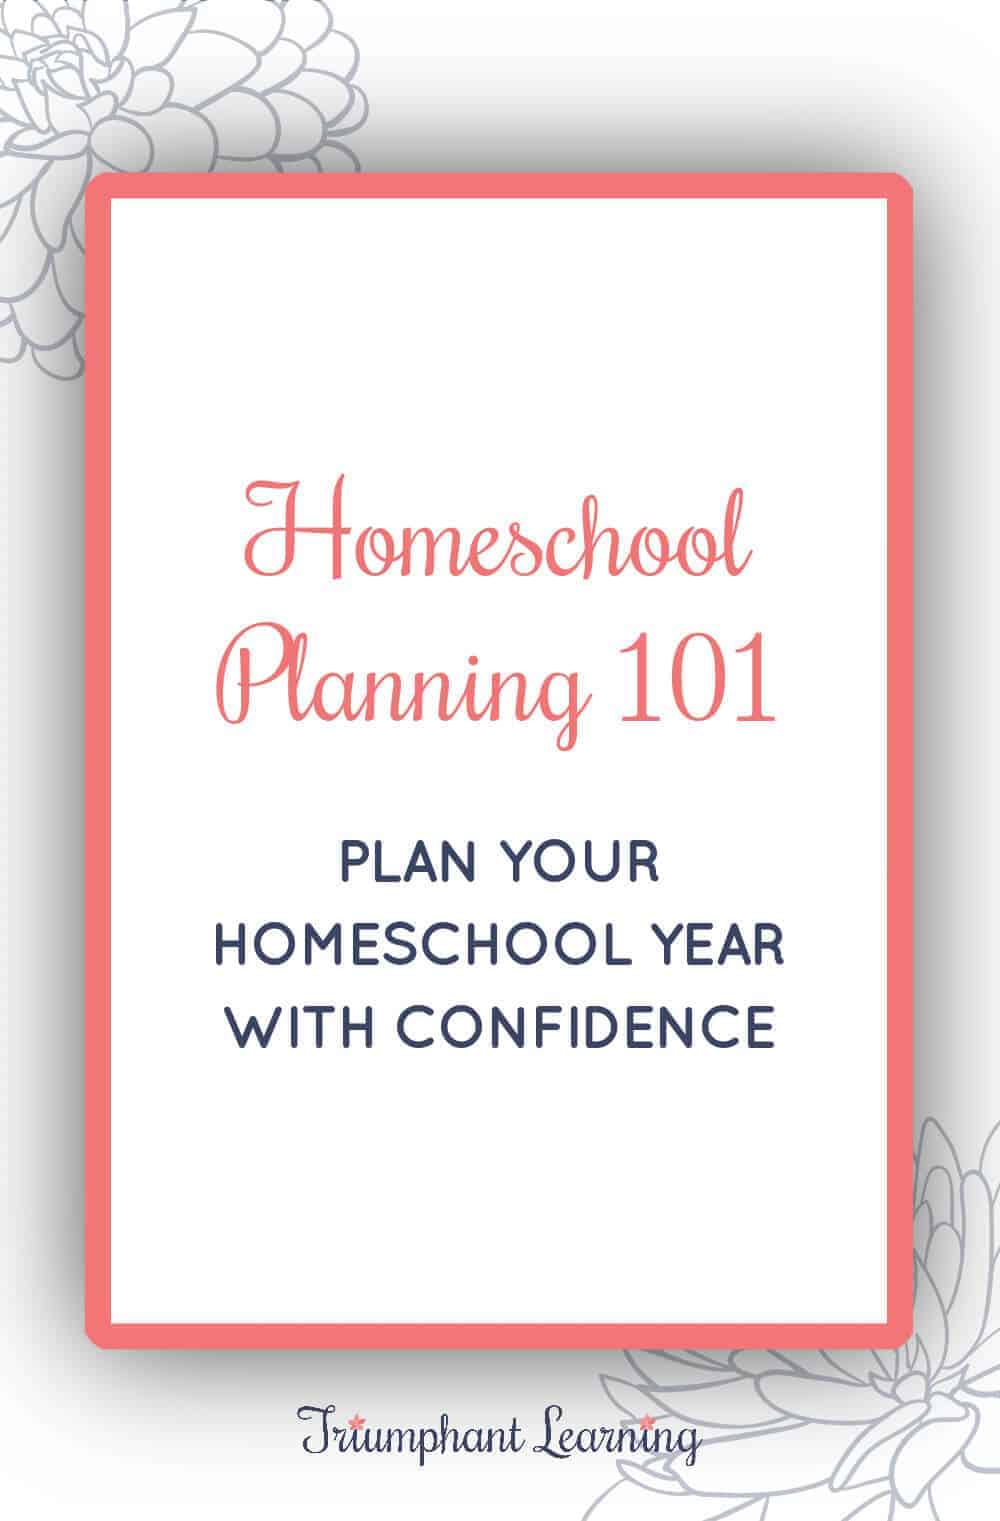 Learn the six simple steps to simplify homeschool planning so you can homeschool your children with confidence. via @TriLearning